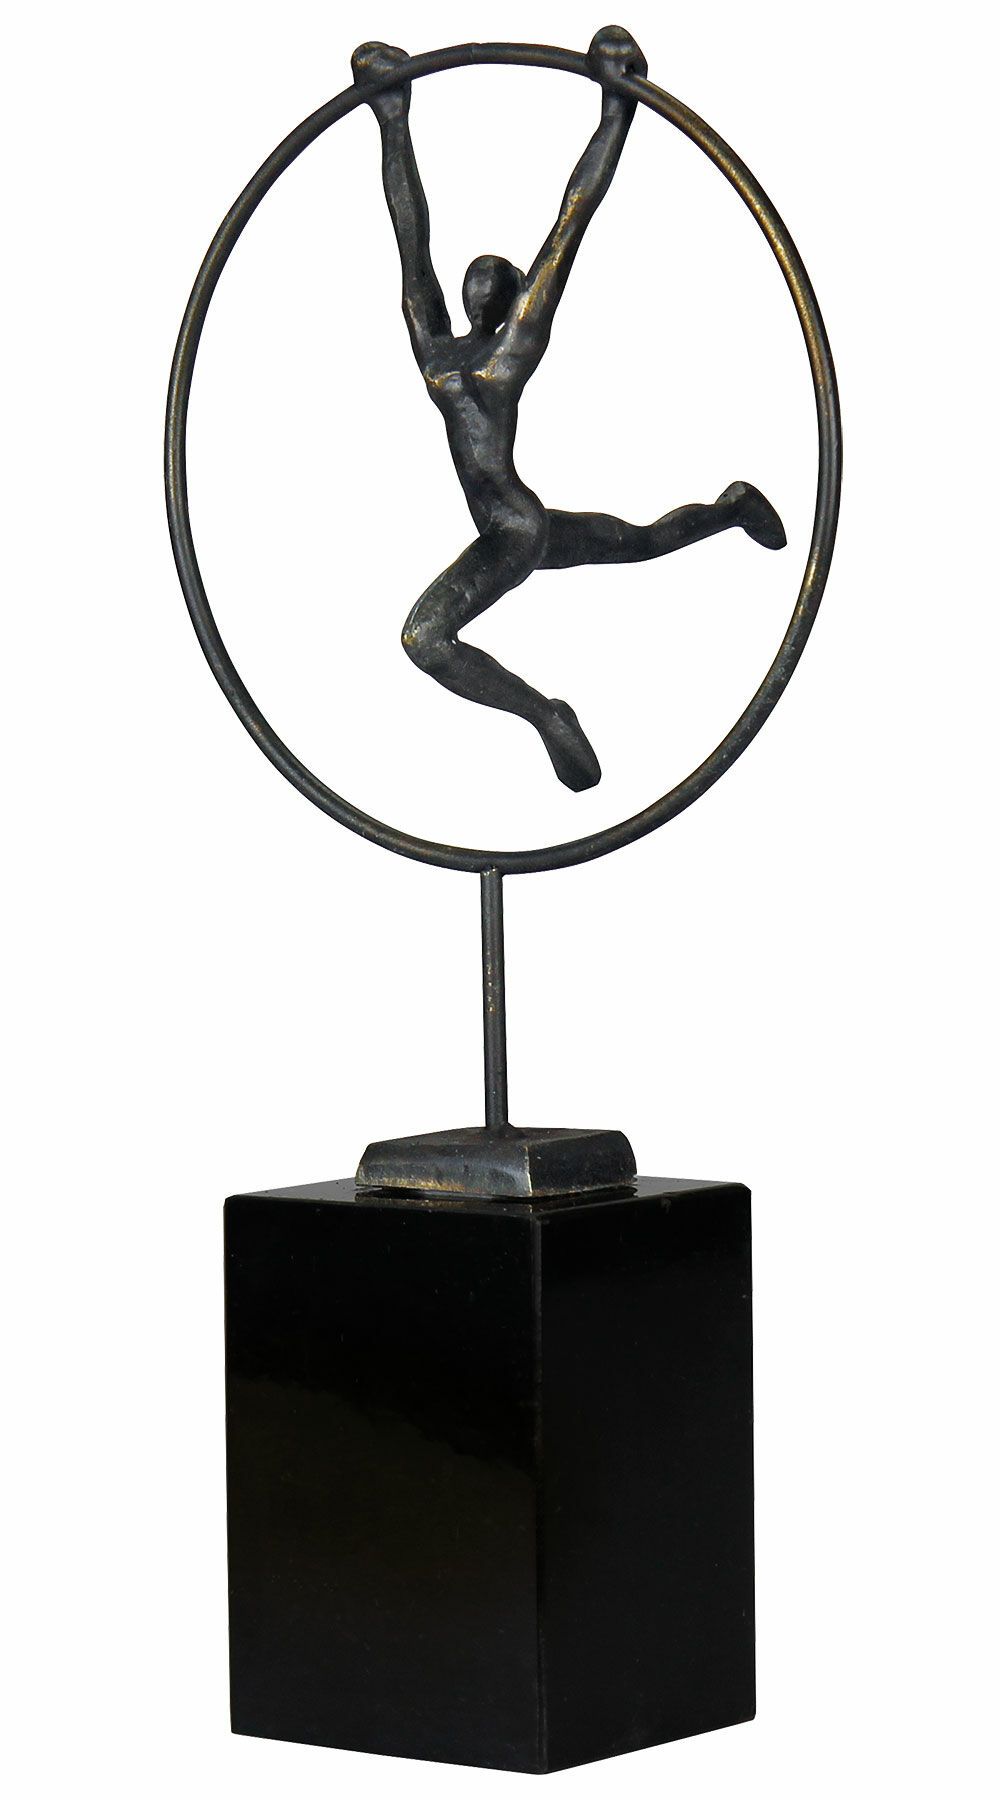 Sculpture "With Momentum" by Gerard